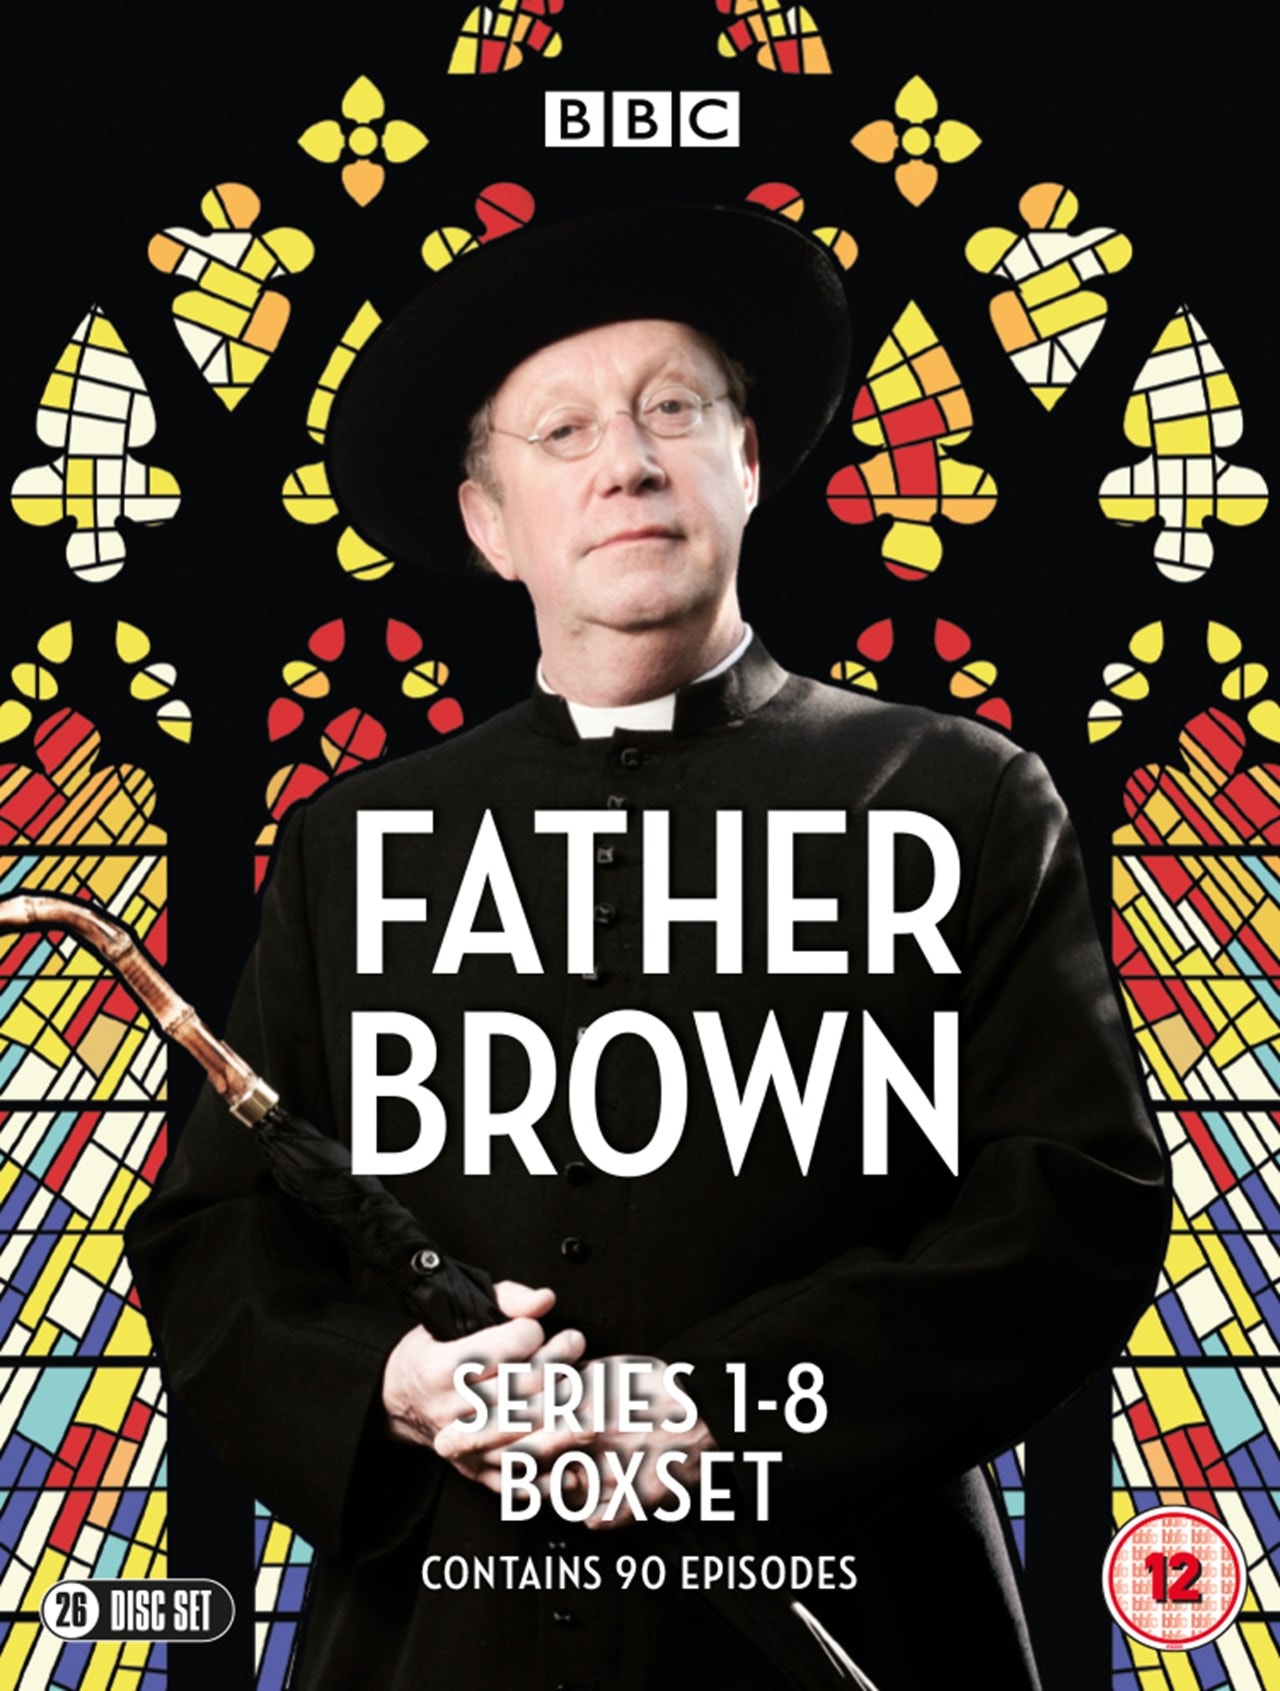 Father Brown Series 1 8 DVD Box Set Free shipping over £20 HMV